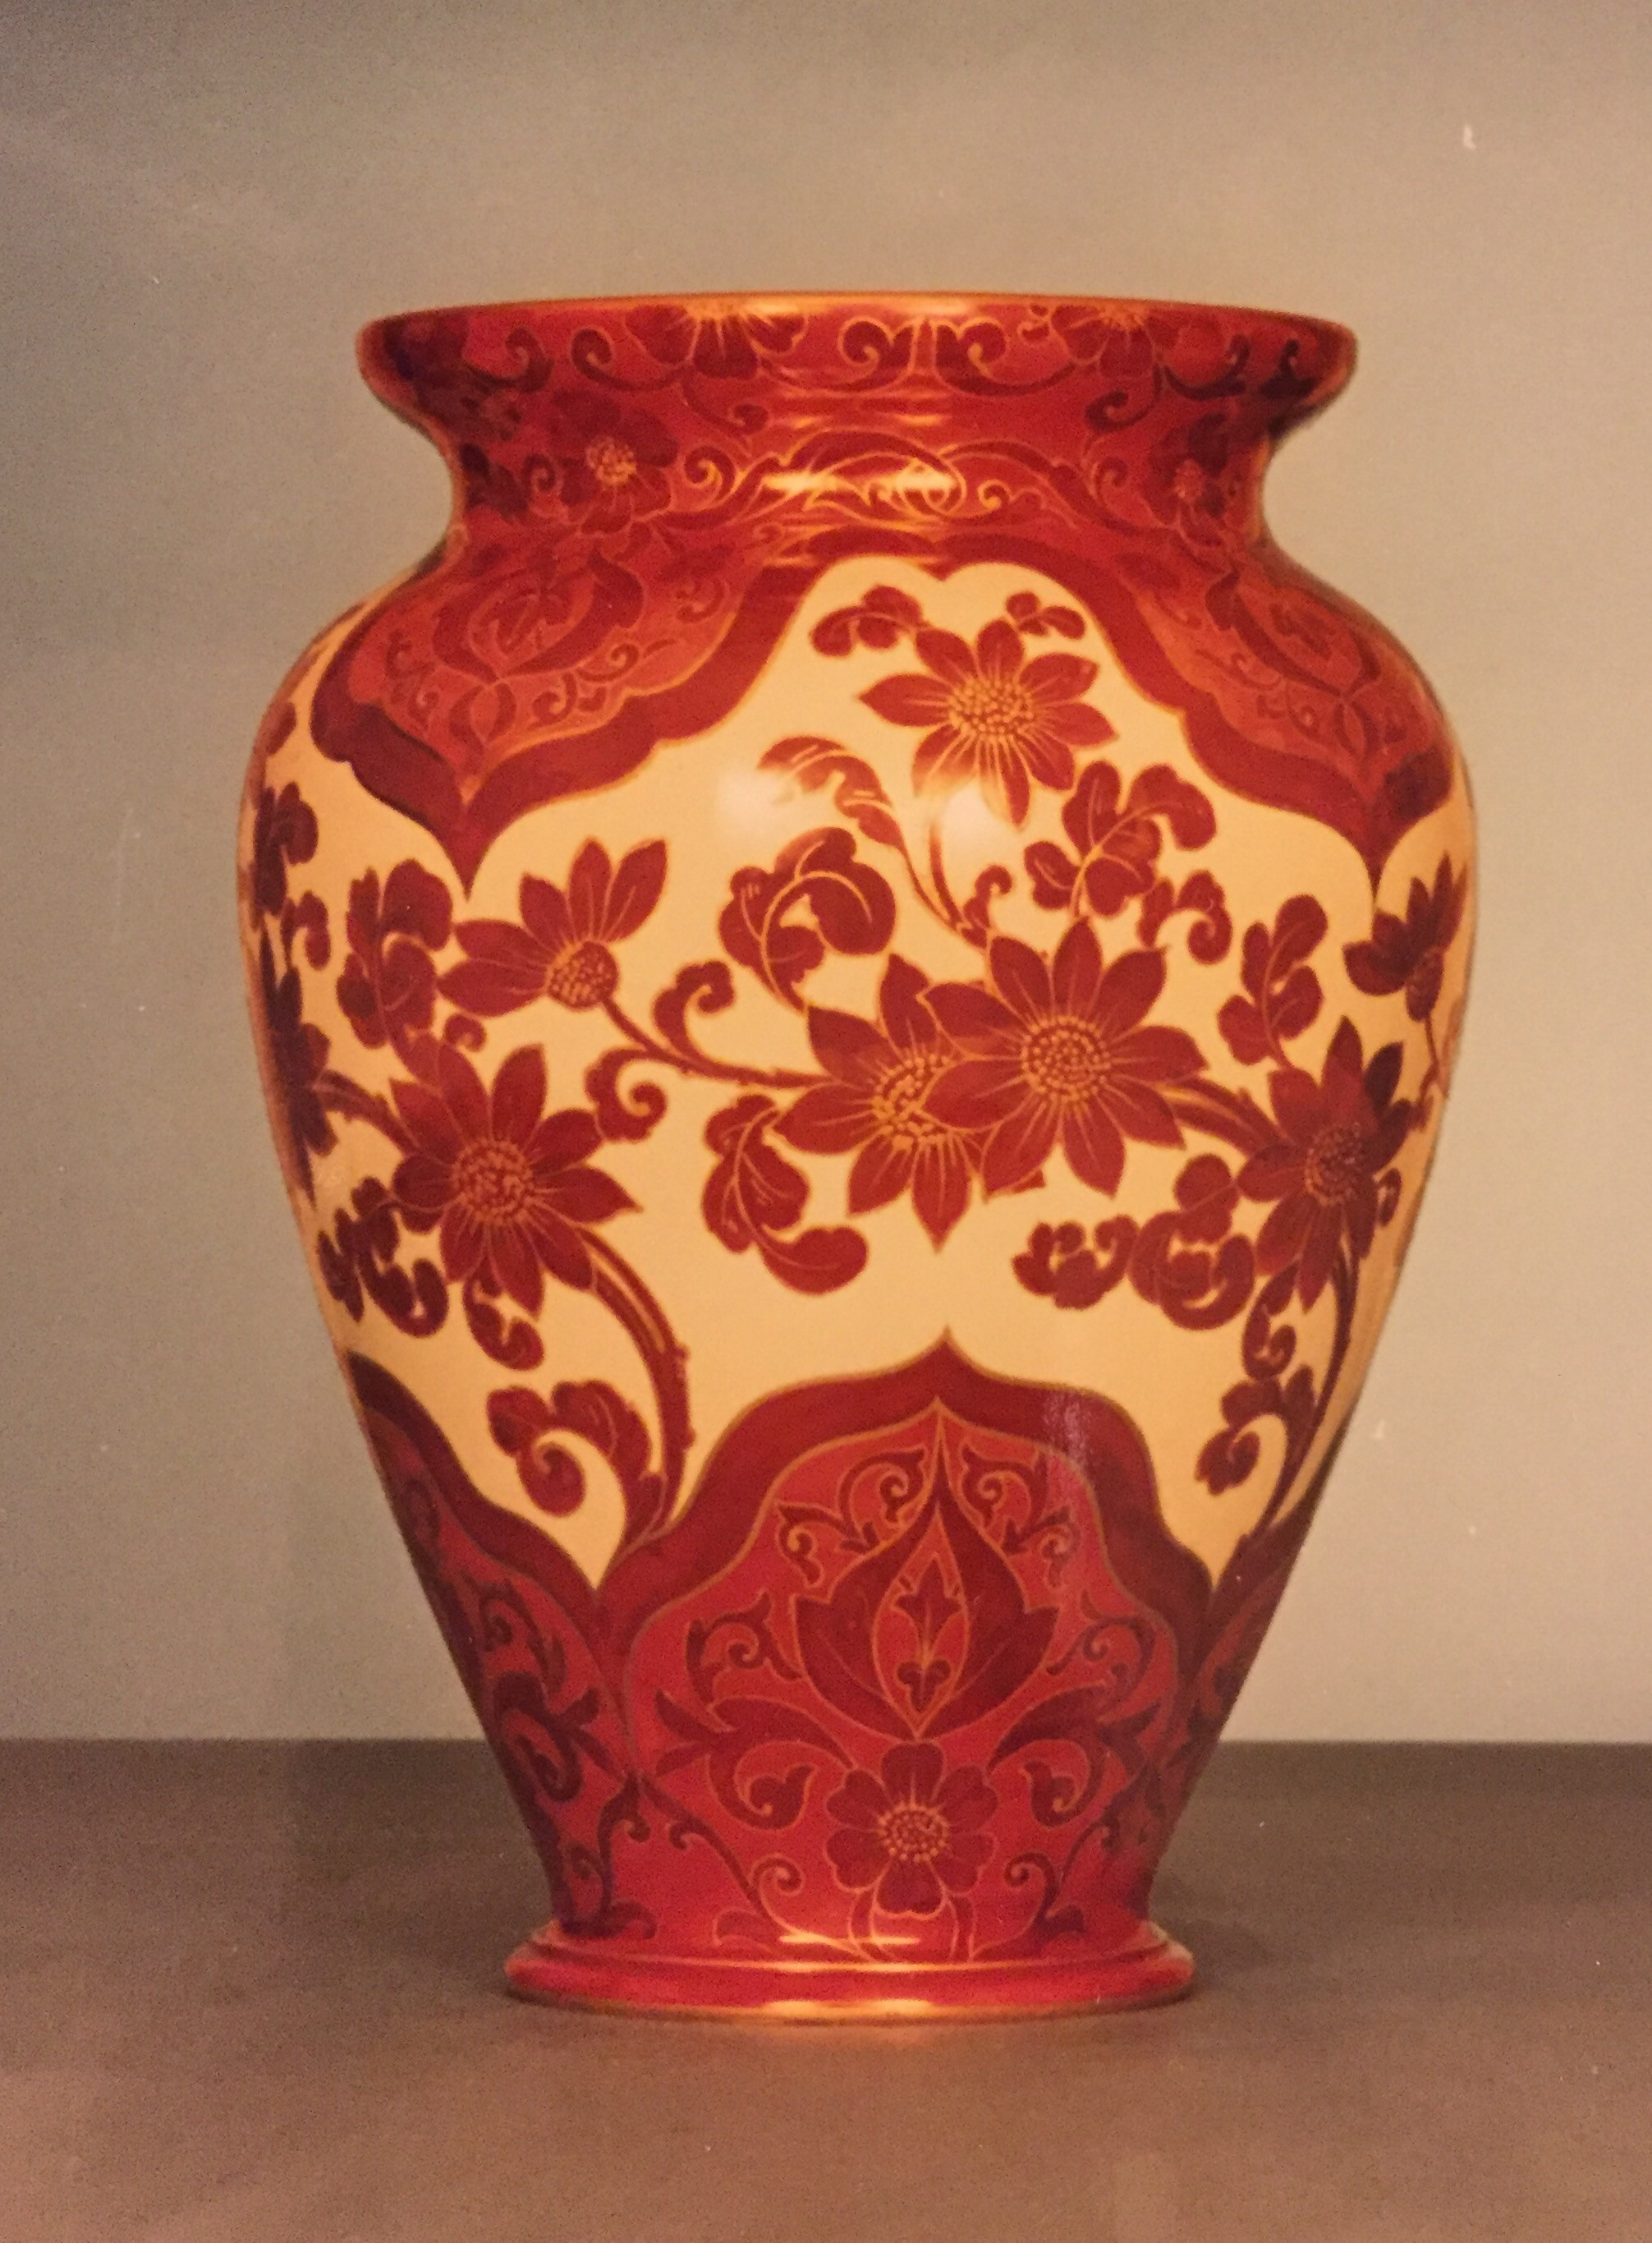 28 Awesome Doulton Burslem Vase 2024 free download doulton burslem vase of burslem doultoncollectorsclub intended for at the time doulton at nile street only had an earthenware body to use as a medium which fortunately suited slaters revival